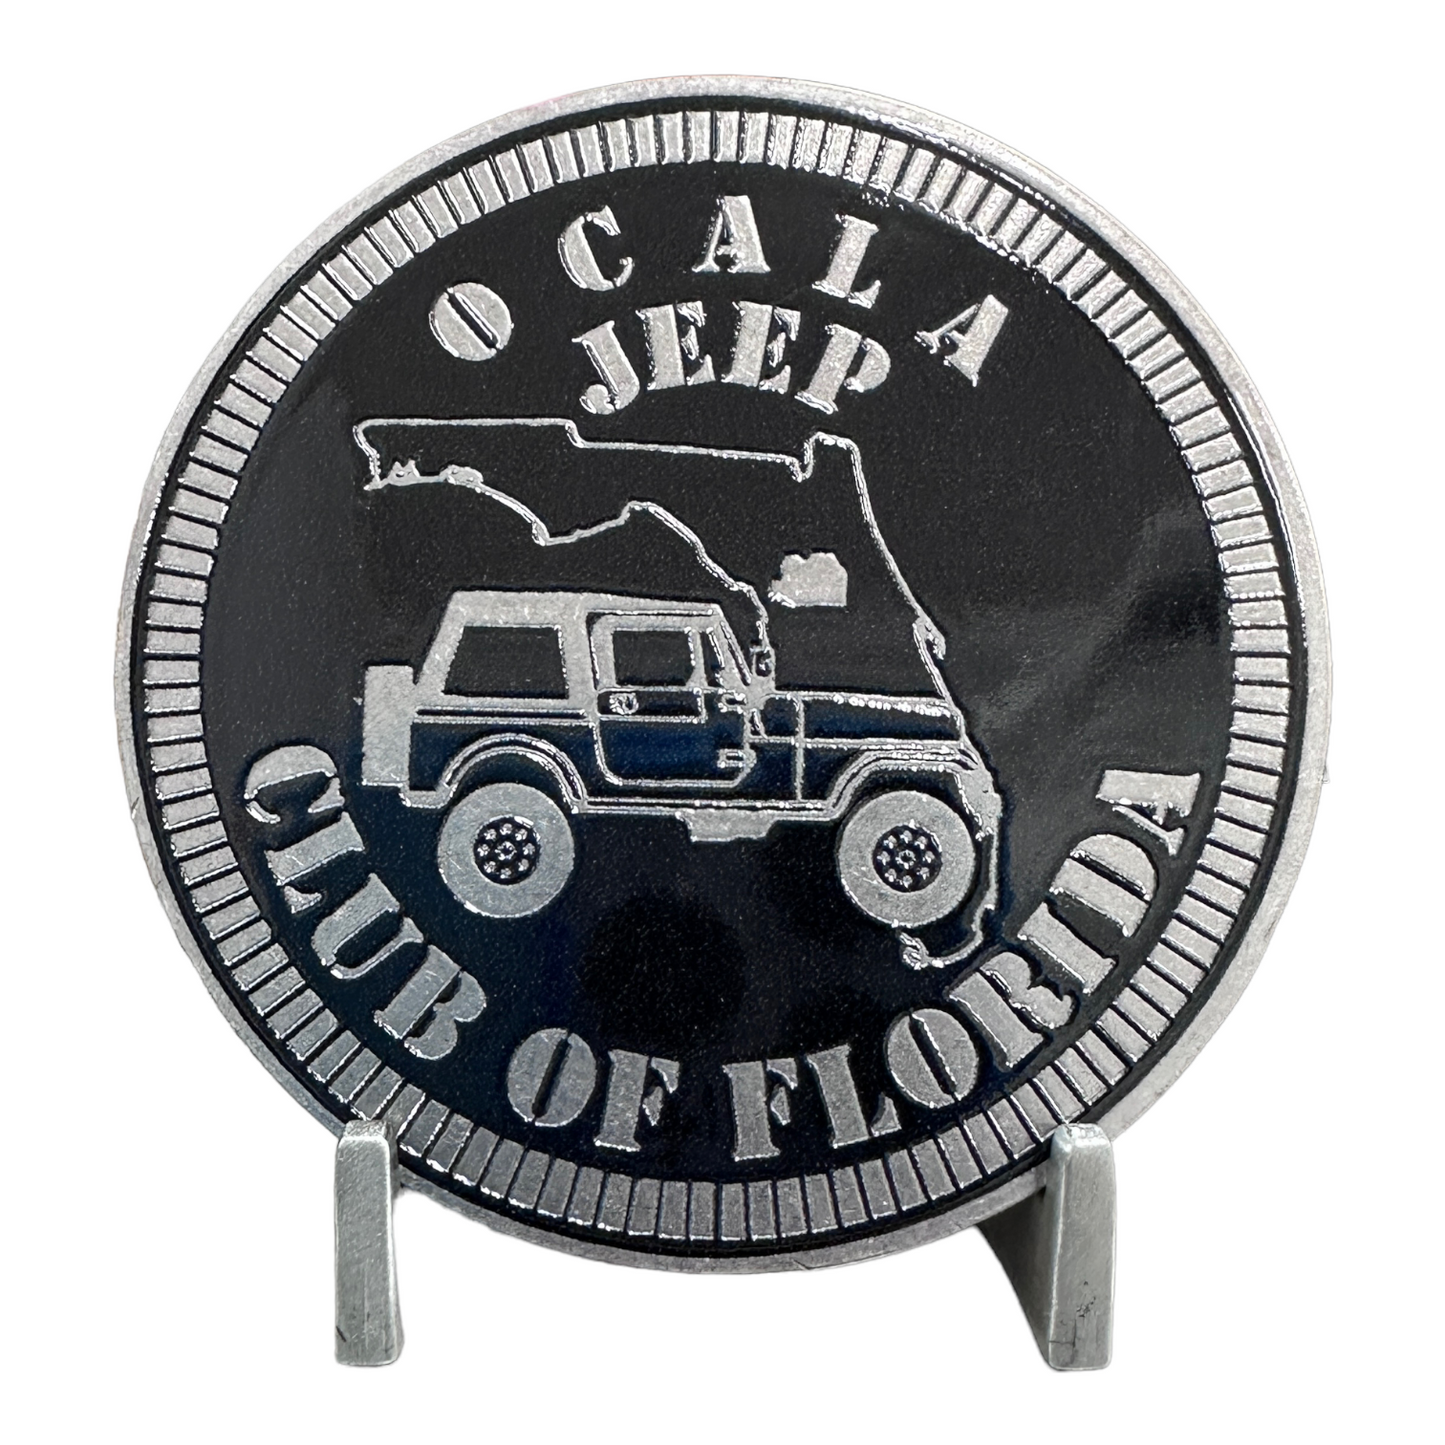 Ocala Jeep Club (Multiple Colors Available)